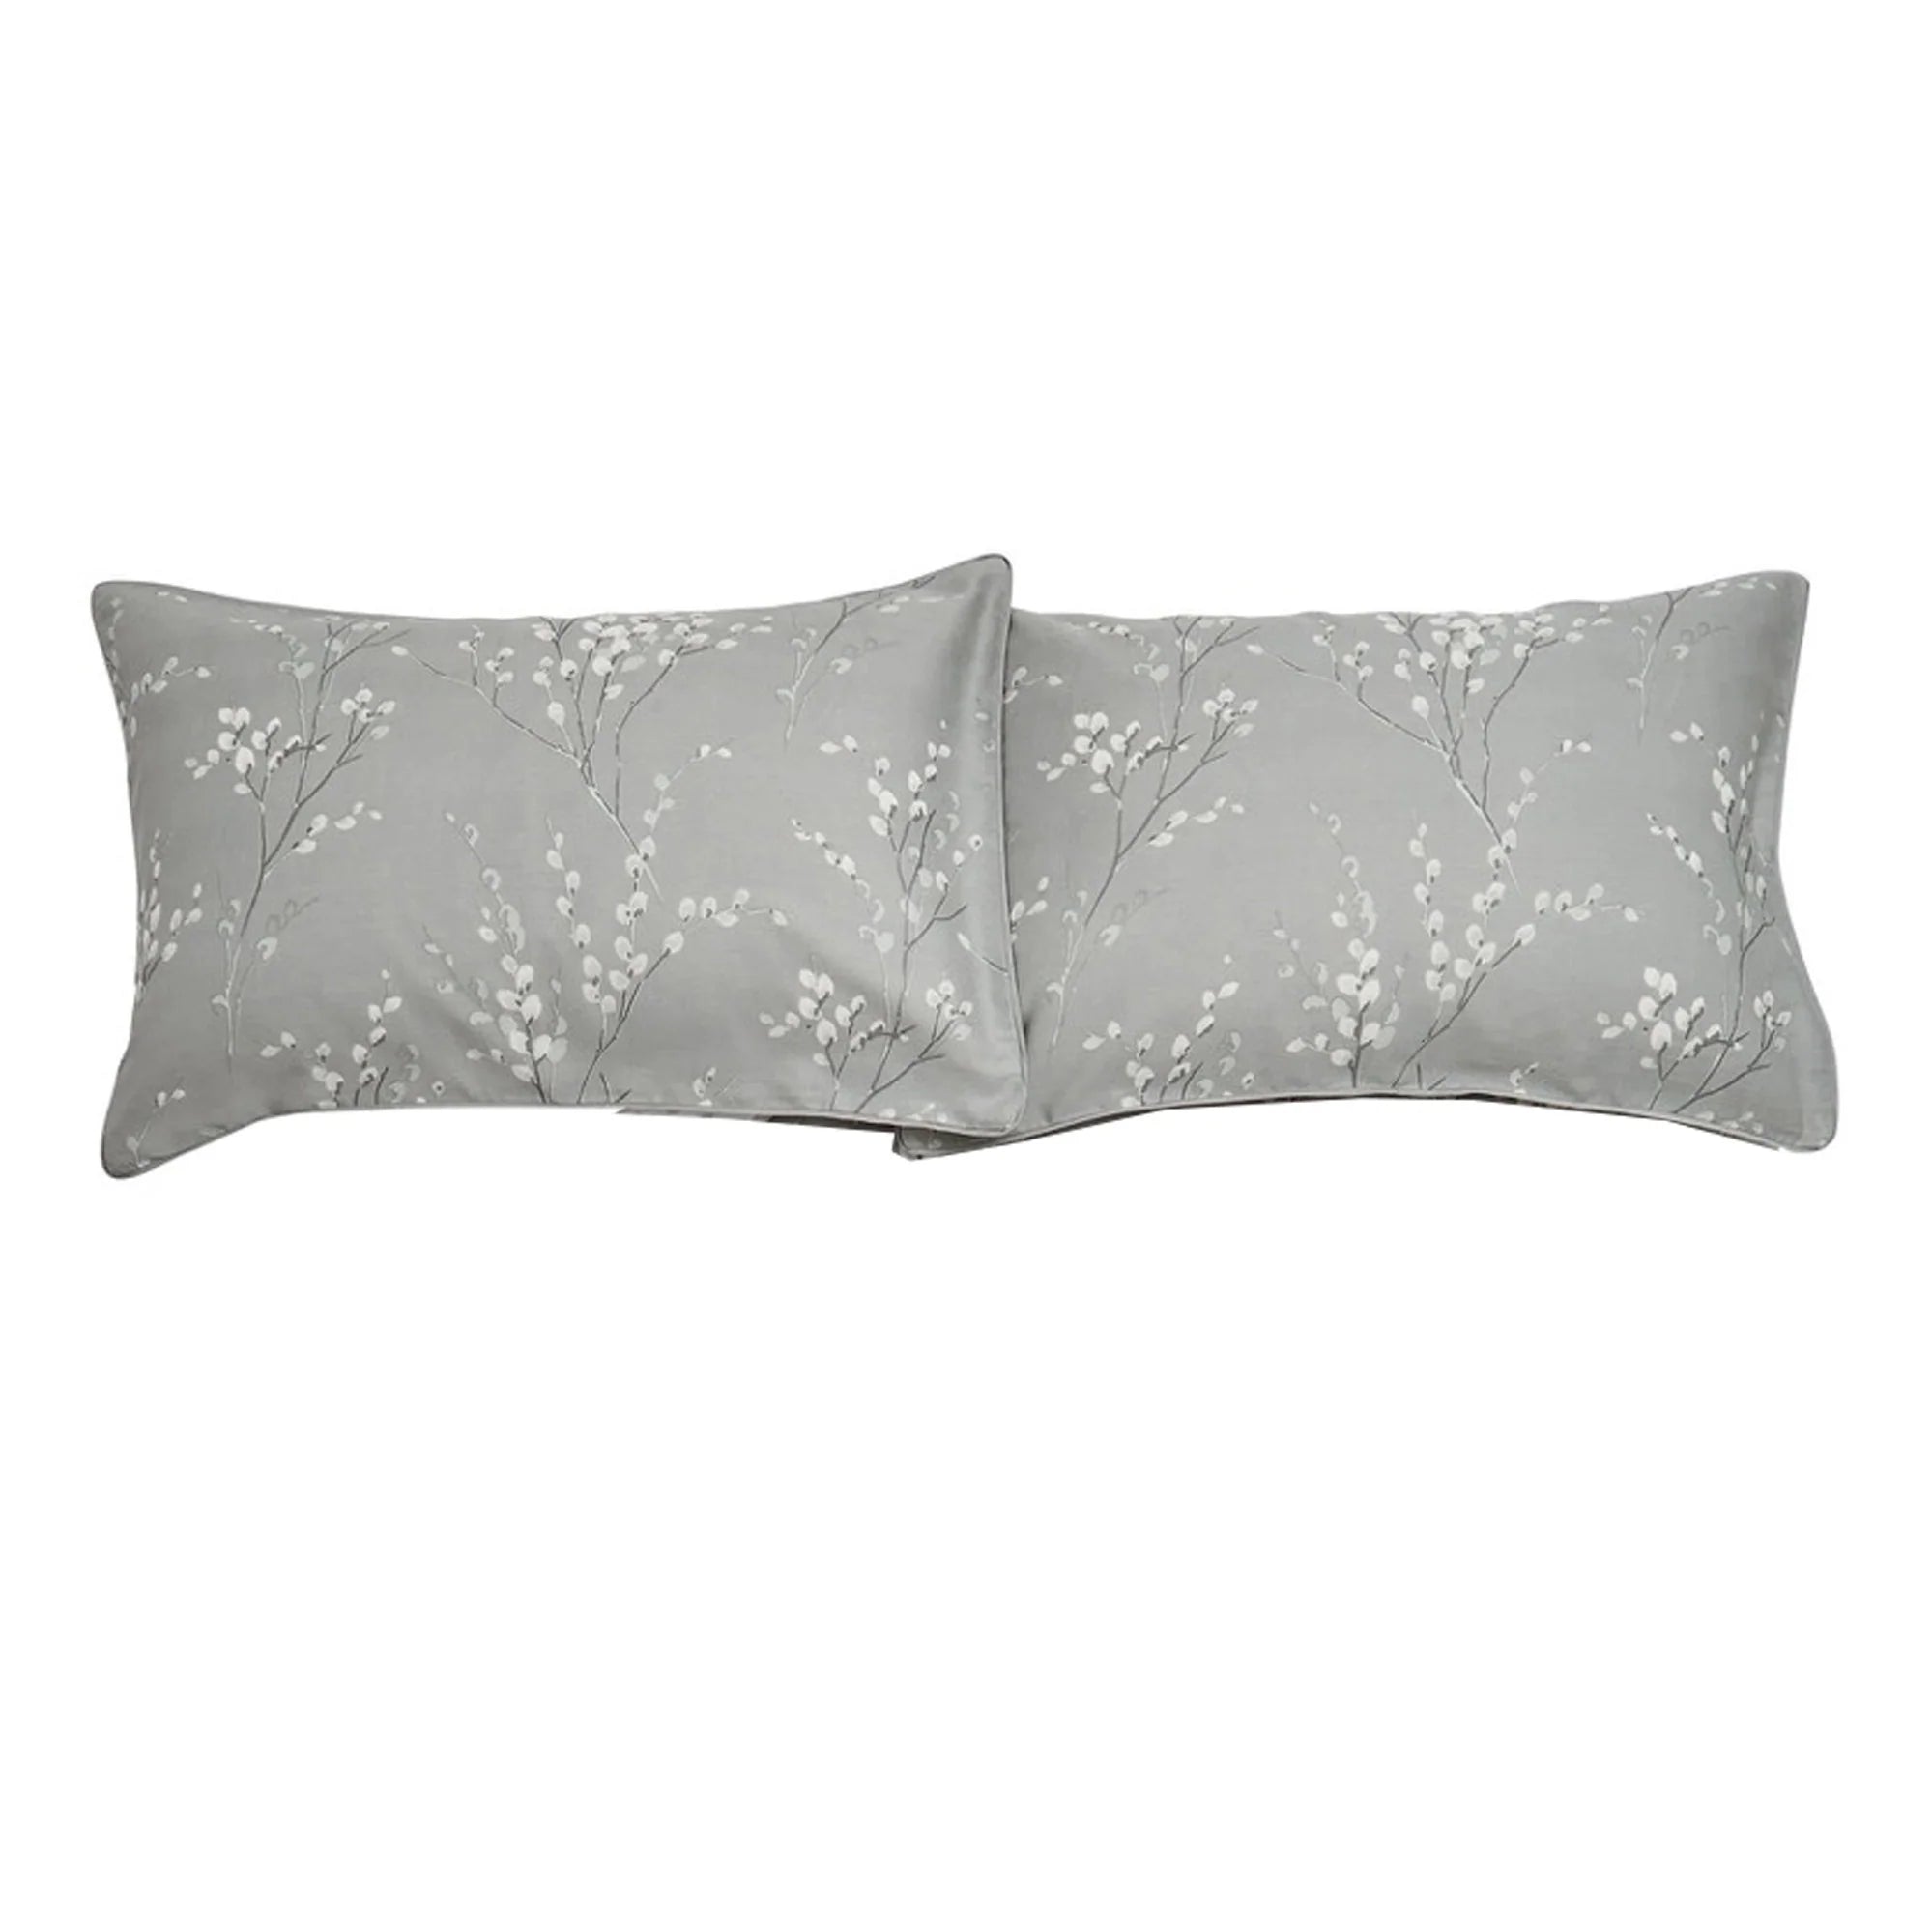 Laura Ashley Pussy Willow Duvet Cover Set - Steel